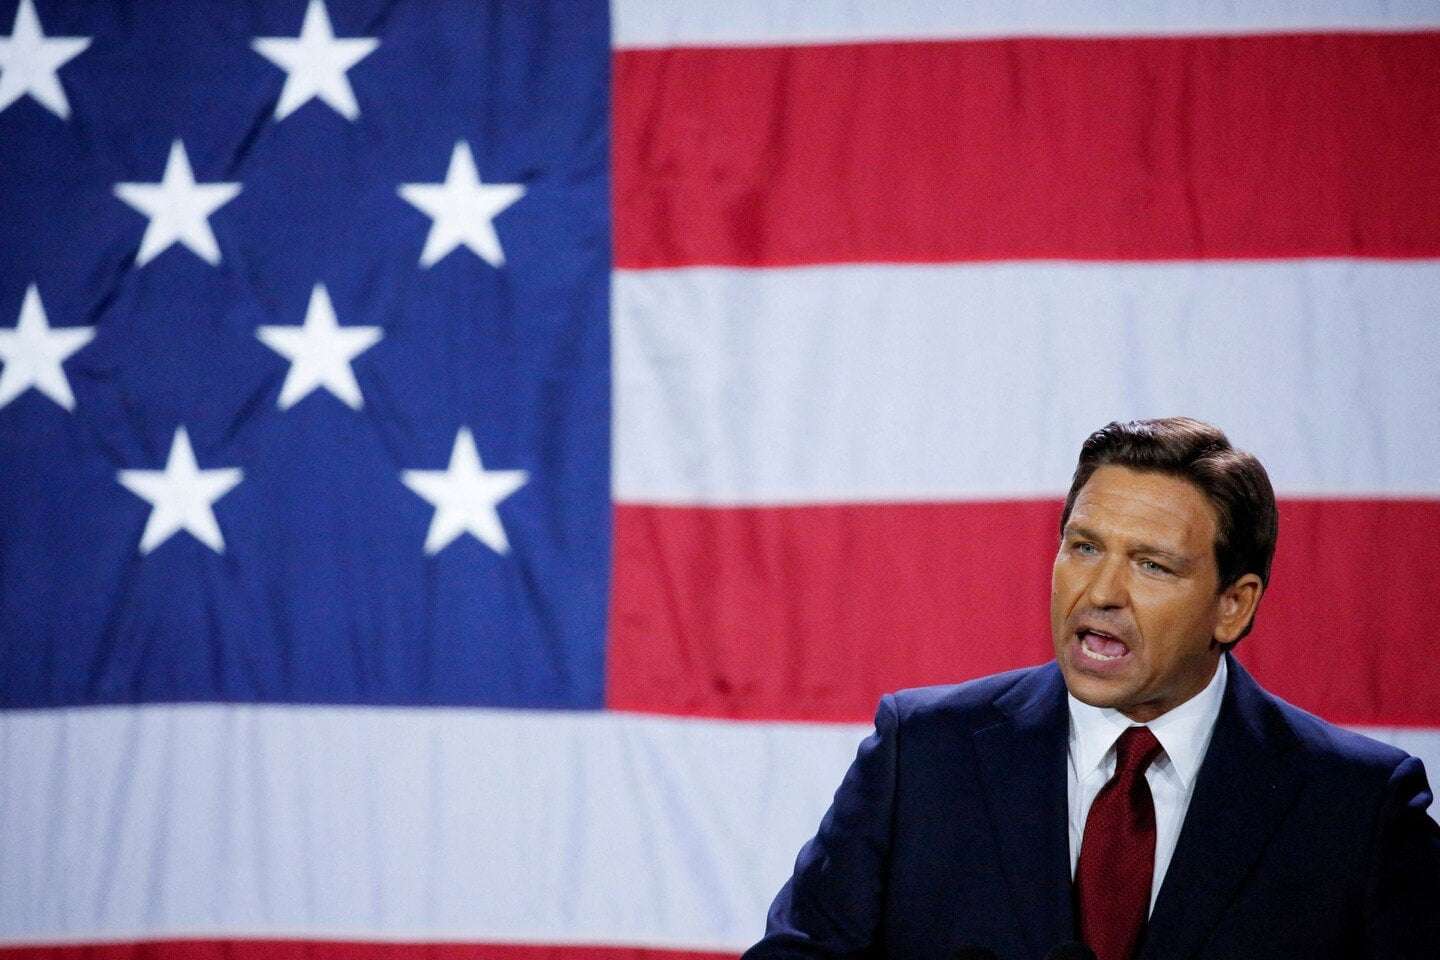 image for DeSantis wanted to ban guns at event, but not to be blamed, emails show